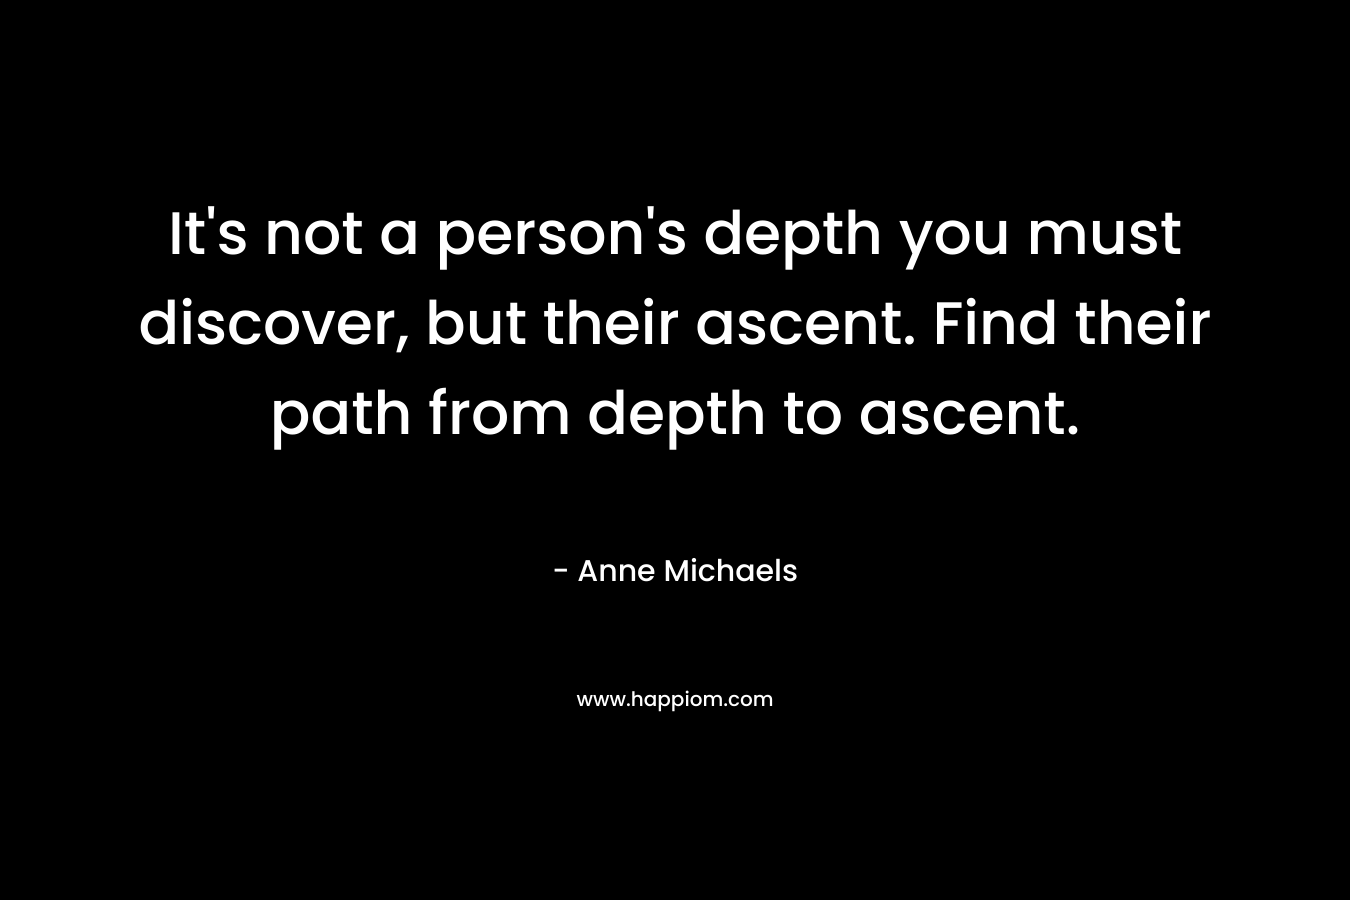 It’s not a person’s depth you must discover, but their ascent. Find their path from depth to ascent. – Anne Michaels